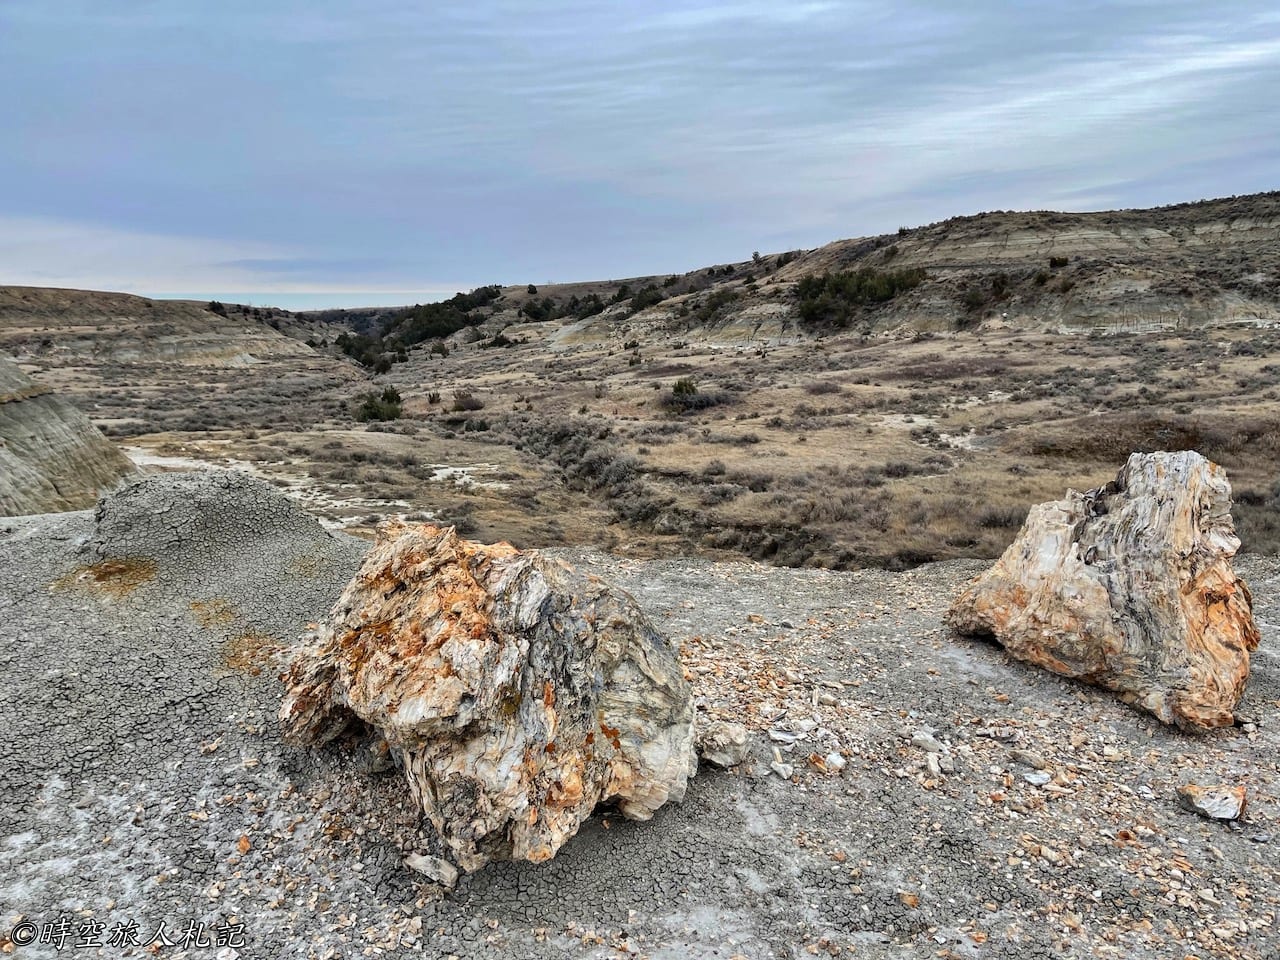 Theodore roosevelt national park,Petrified forest,羅斯福國家公園,石化林 26